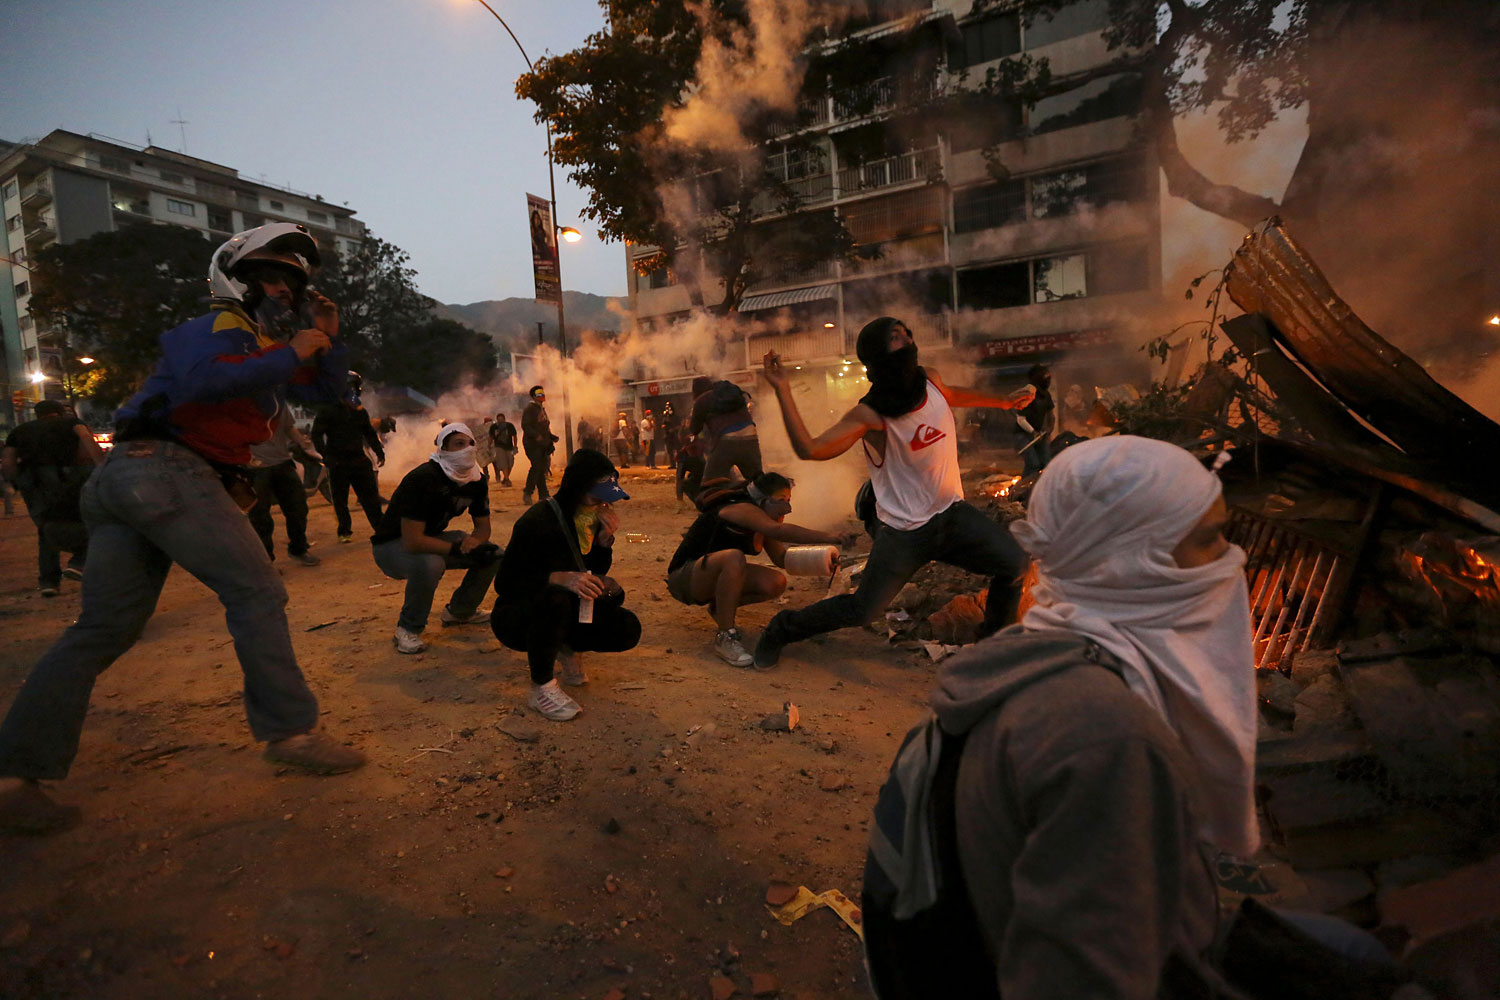 Masked demonstrators throw stones at Bolivarian National Police during clashes in Caracas, March 3, 2014.